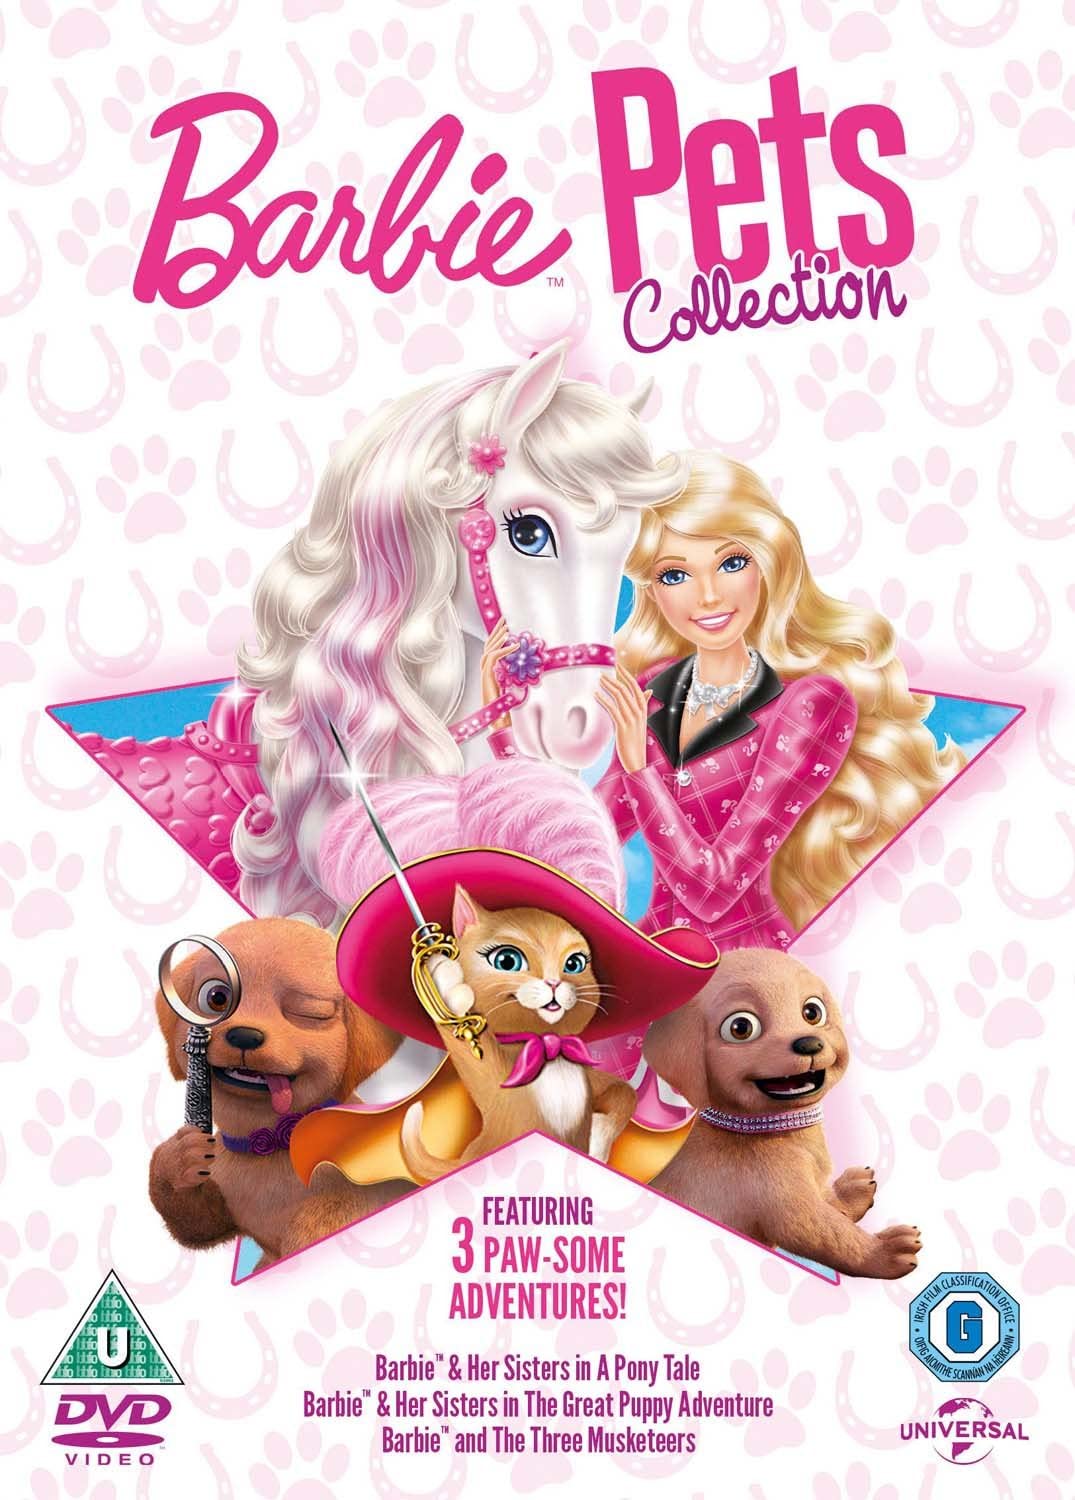 Die Barbie Pets Collection [2016] [DVD]